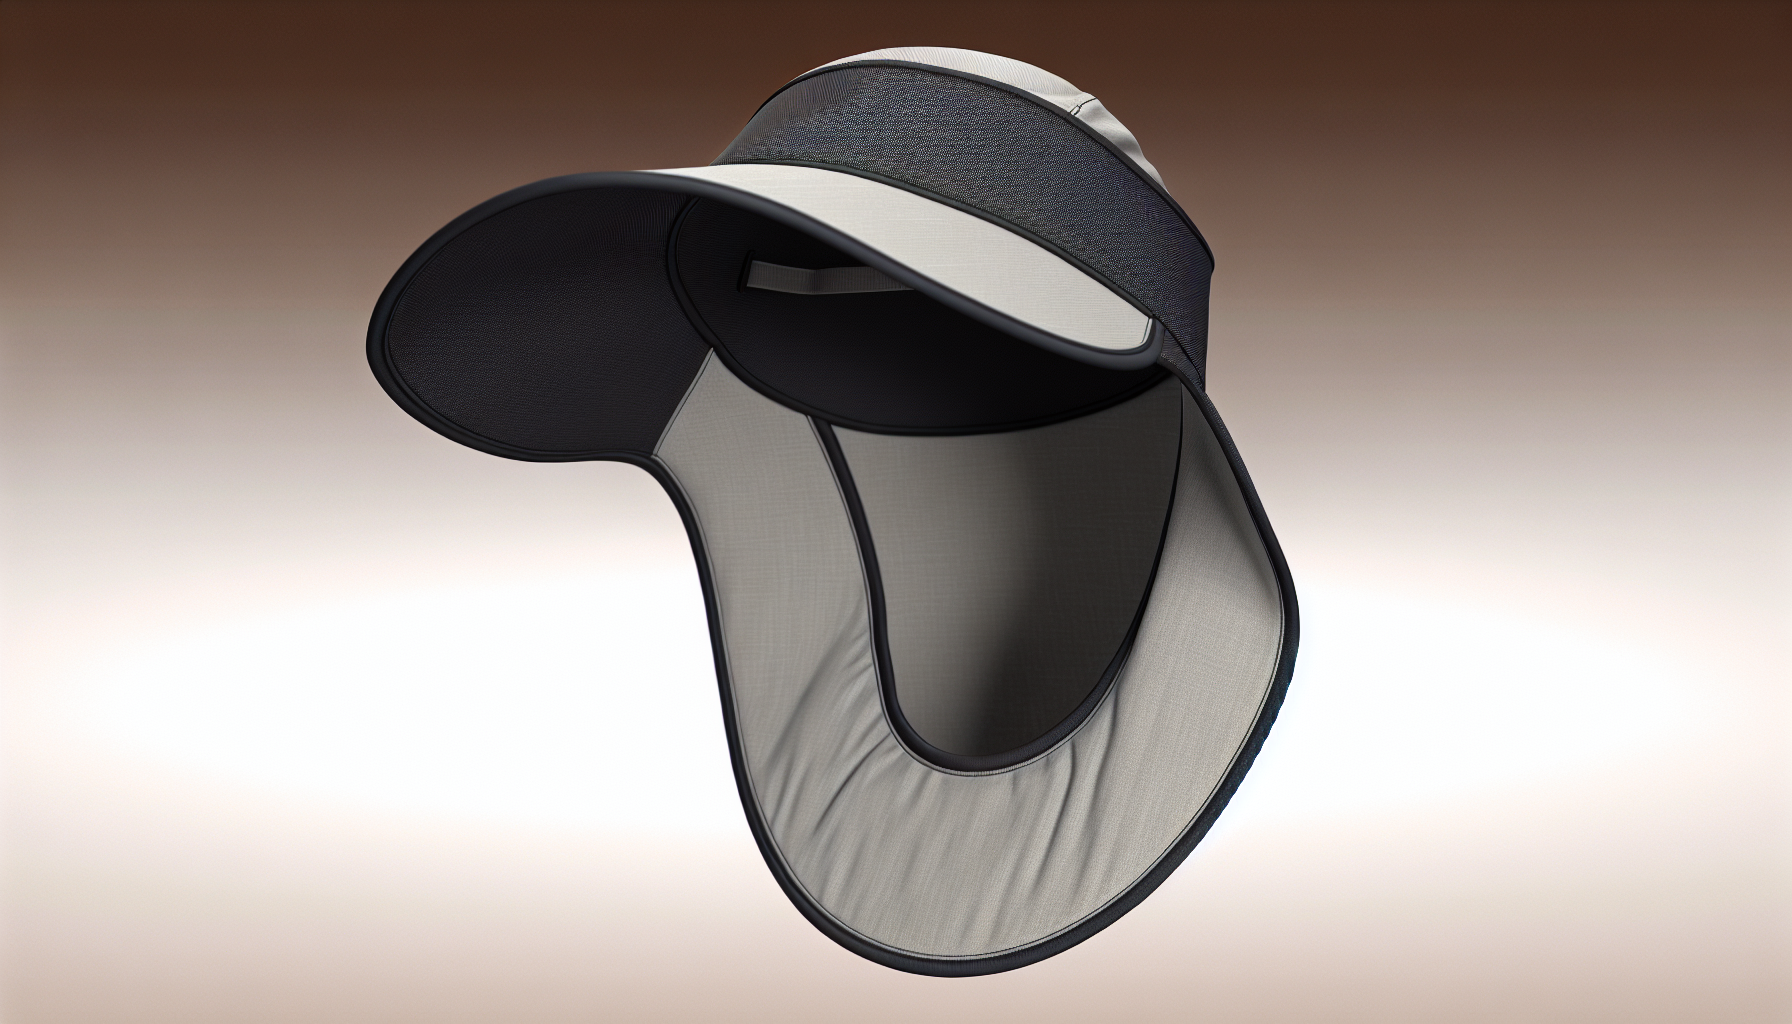 Sun visor hat with extended neck protection